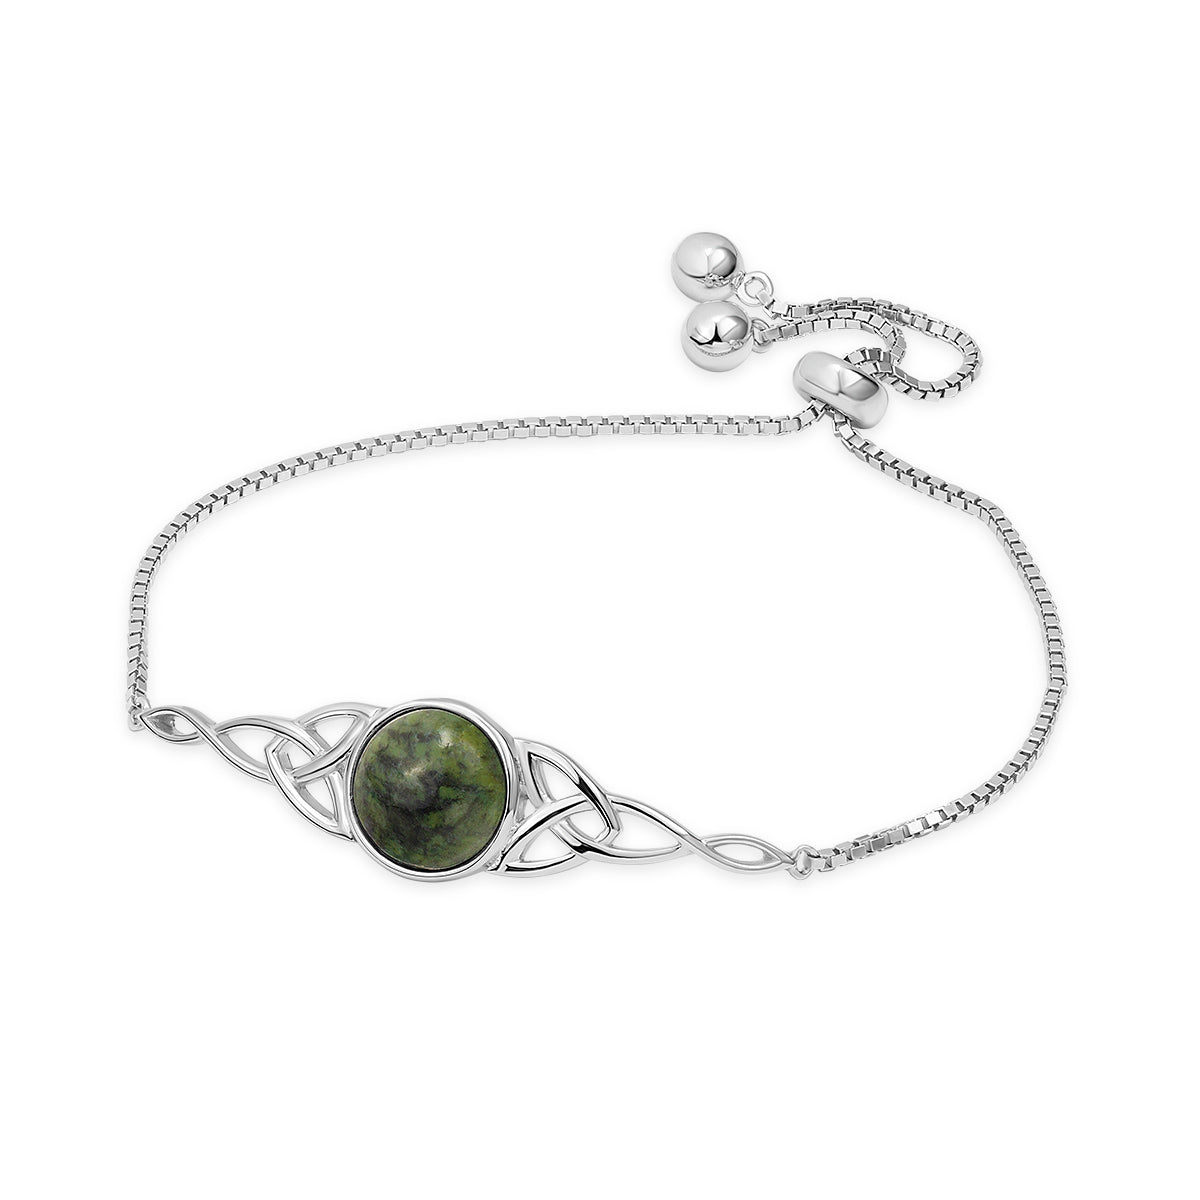 Sterling silver connemara marble stone round centre with trinity knot design bracelet S50116 from Solvar